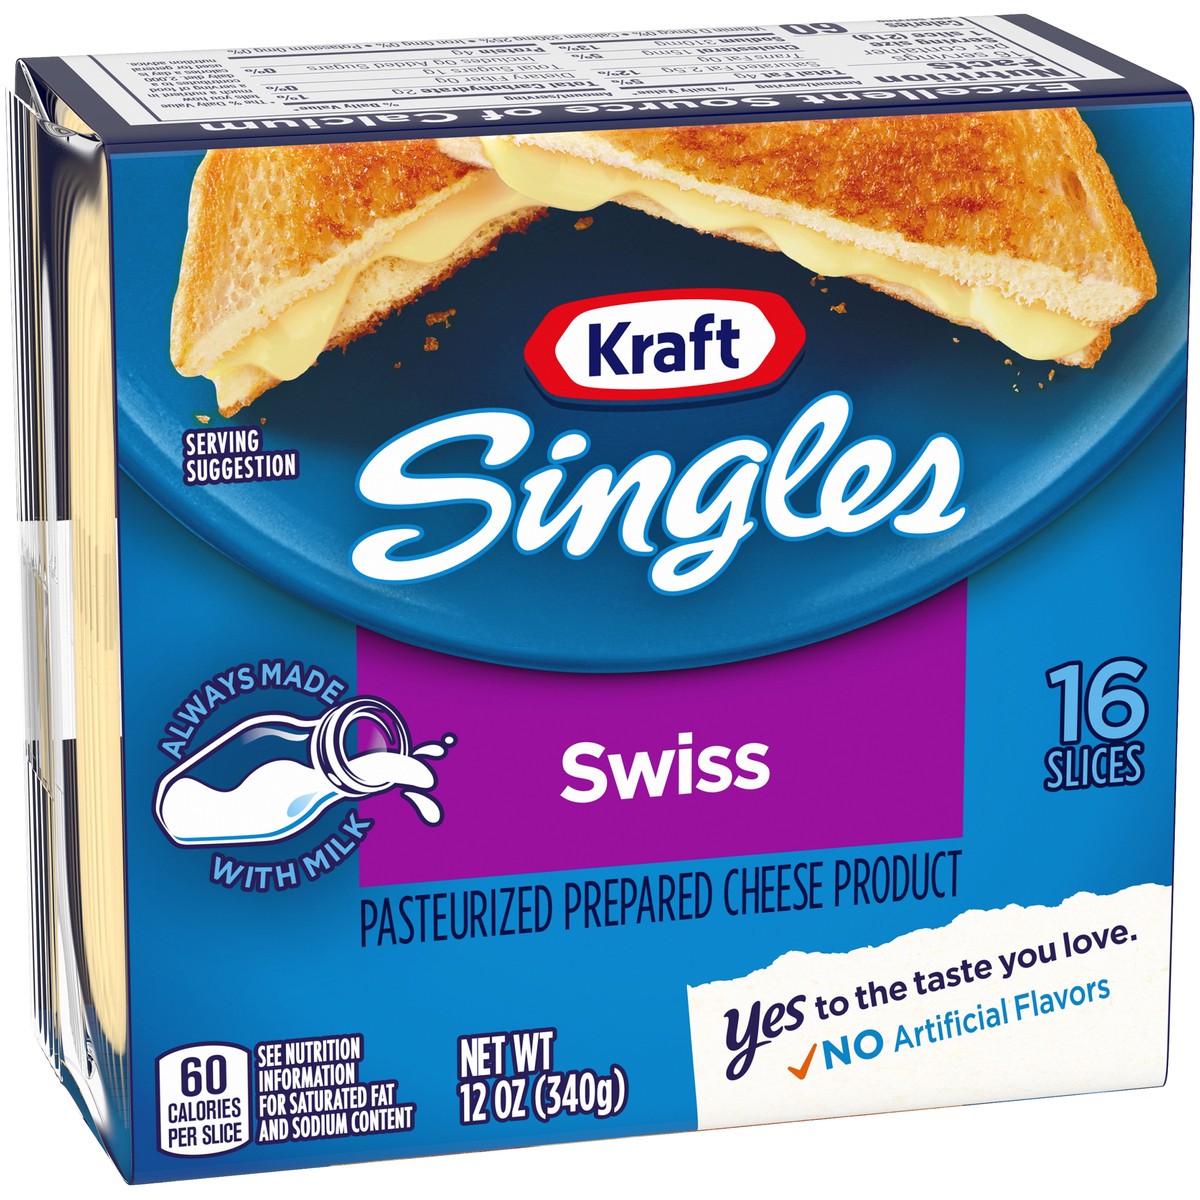 slide 9 of 9, Kraft Singles Swiss Pasteurized Prepared Cheese Product Slices, 16 ct Pack, 16 ct